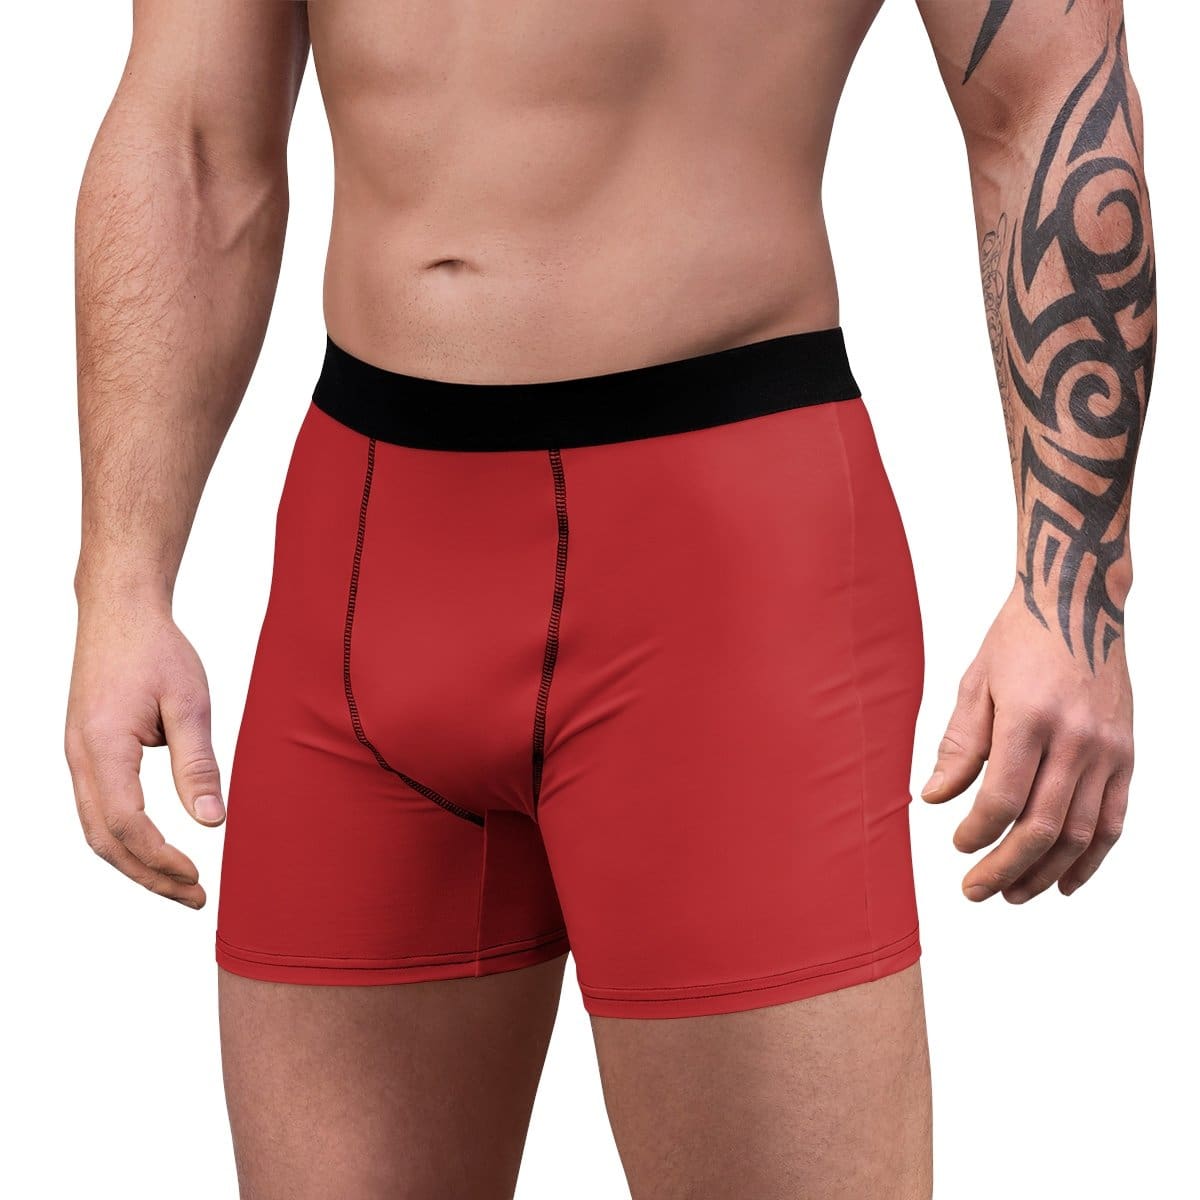 D20 All Natural - Grey on Red Boxer Briefs - All Over Prints